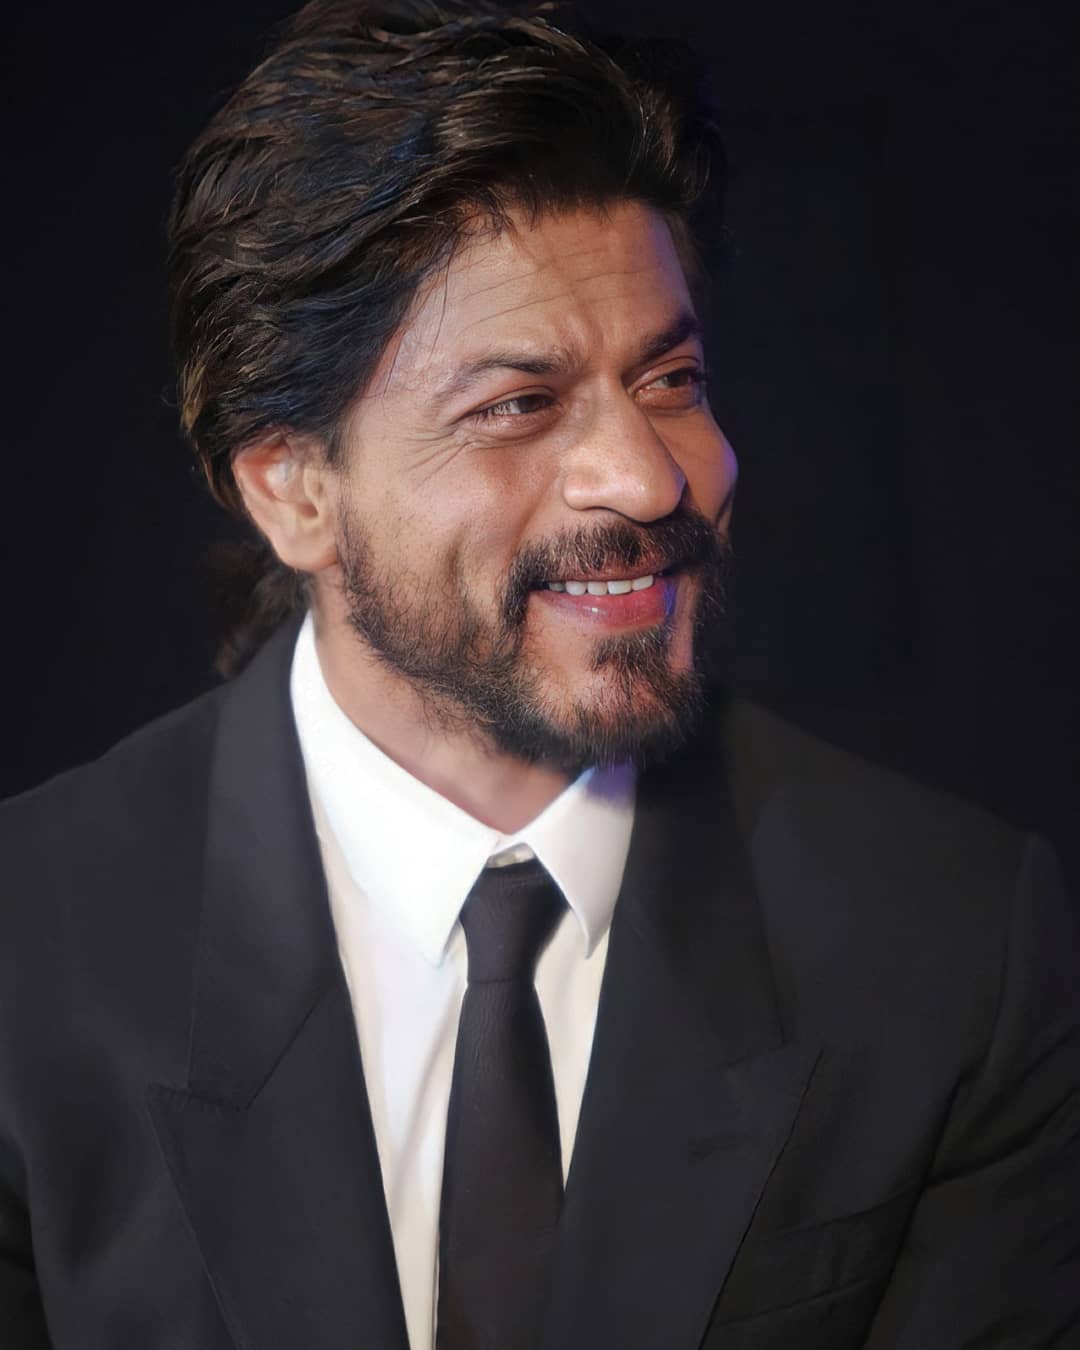 Smiling Shahrukh khan in black suit and white shirt showing his ponytail look - shahrukh khan best hairstyles